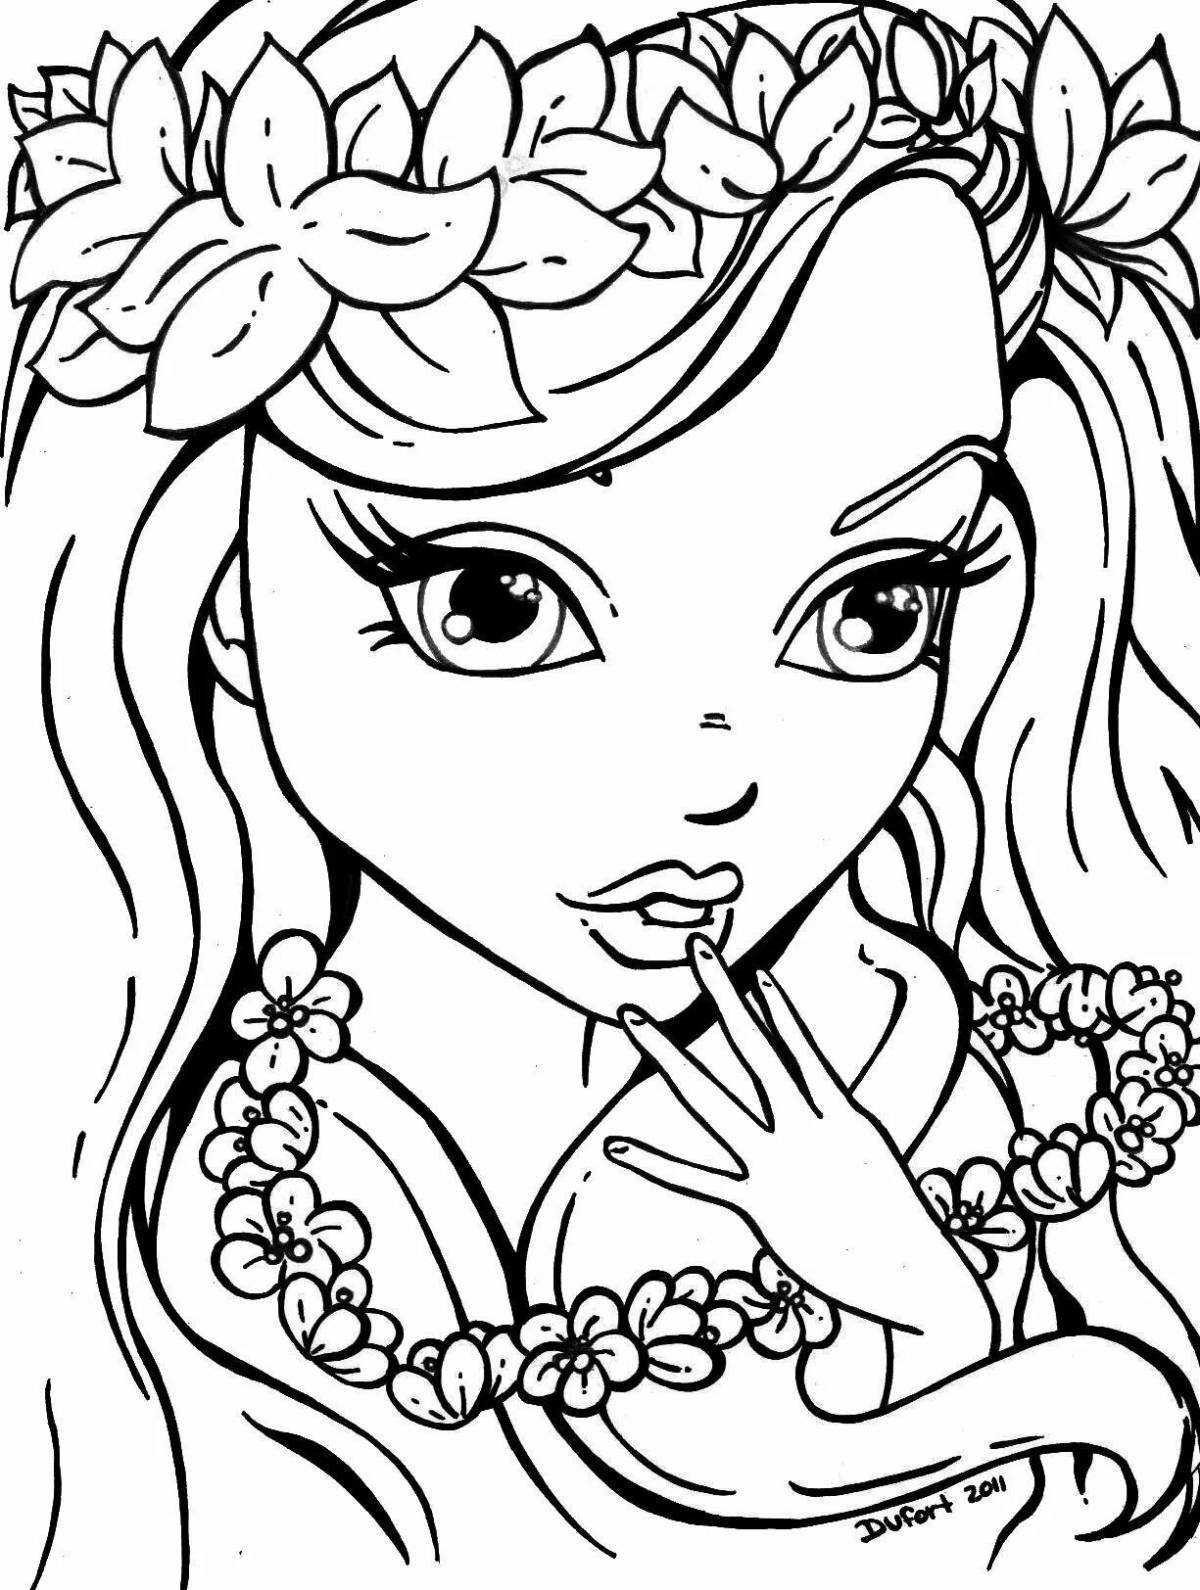 Creative coloring book for 12 year old girls